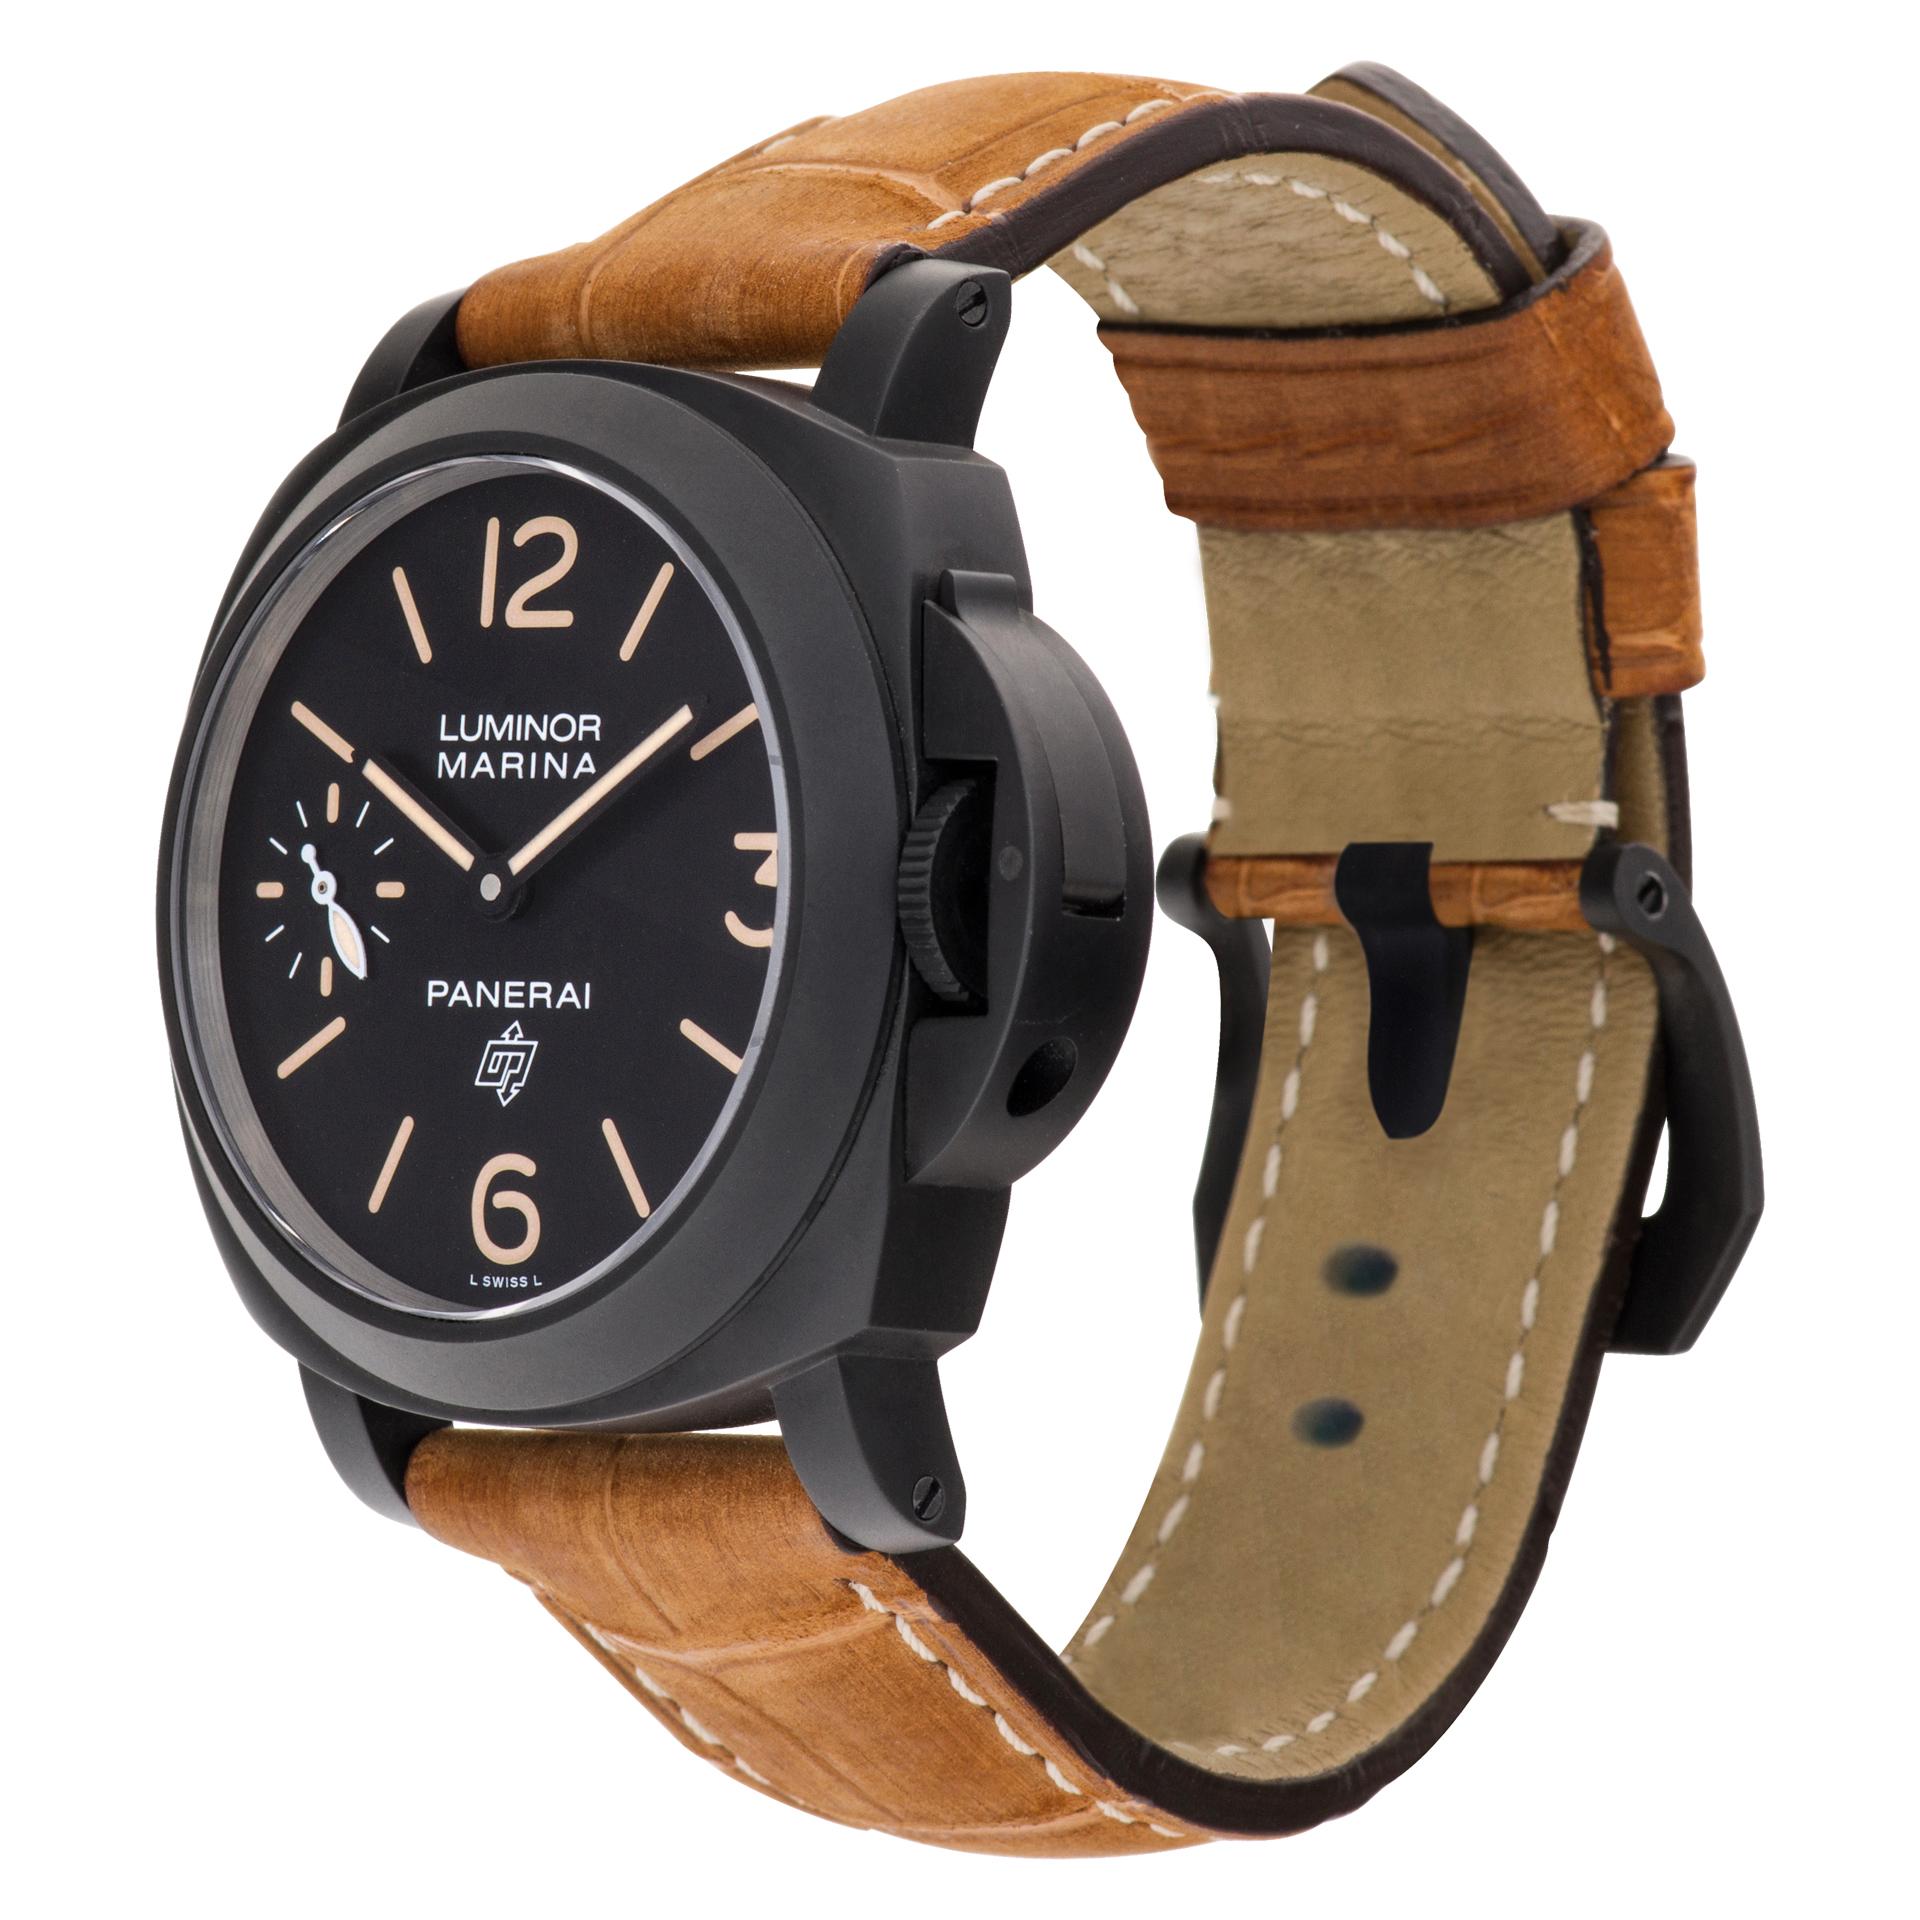 Homage to watch magazine Revolution's 10th Anniversary, Panerai Luminor Marina 8-Day in black DLC-coated steel on new factory original Panerai tan alligator strap with Panerai tang buckle. Manual w/ subseconds. 44 mm case size. Ref PAM00599. Circa